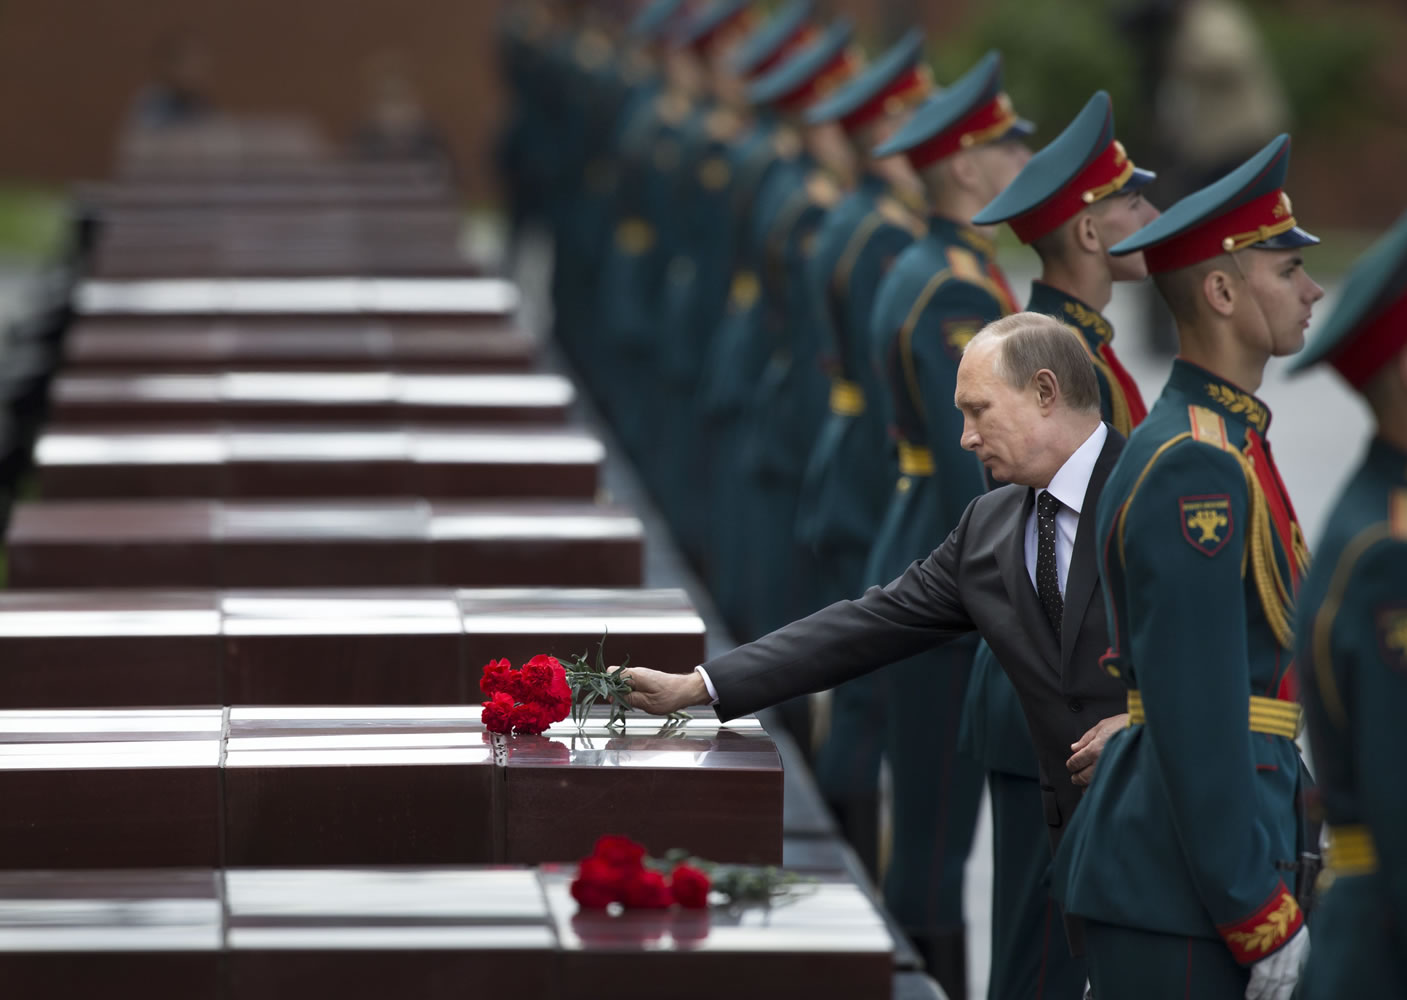 Russian President Vladimir Putin, second from right, takes part in a wreath-laying ceremony Sunday at the Tomb of the Unknown Soldier outside Moscowu2019s Kremlin Wall to mark the 73rd anniversary of the Nazi invasion of the Soviet Union.